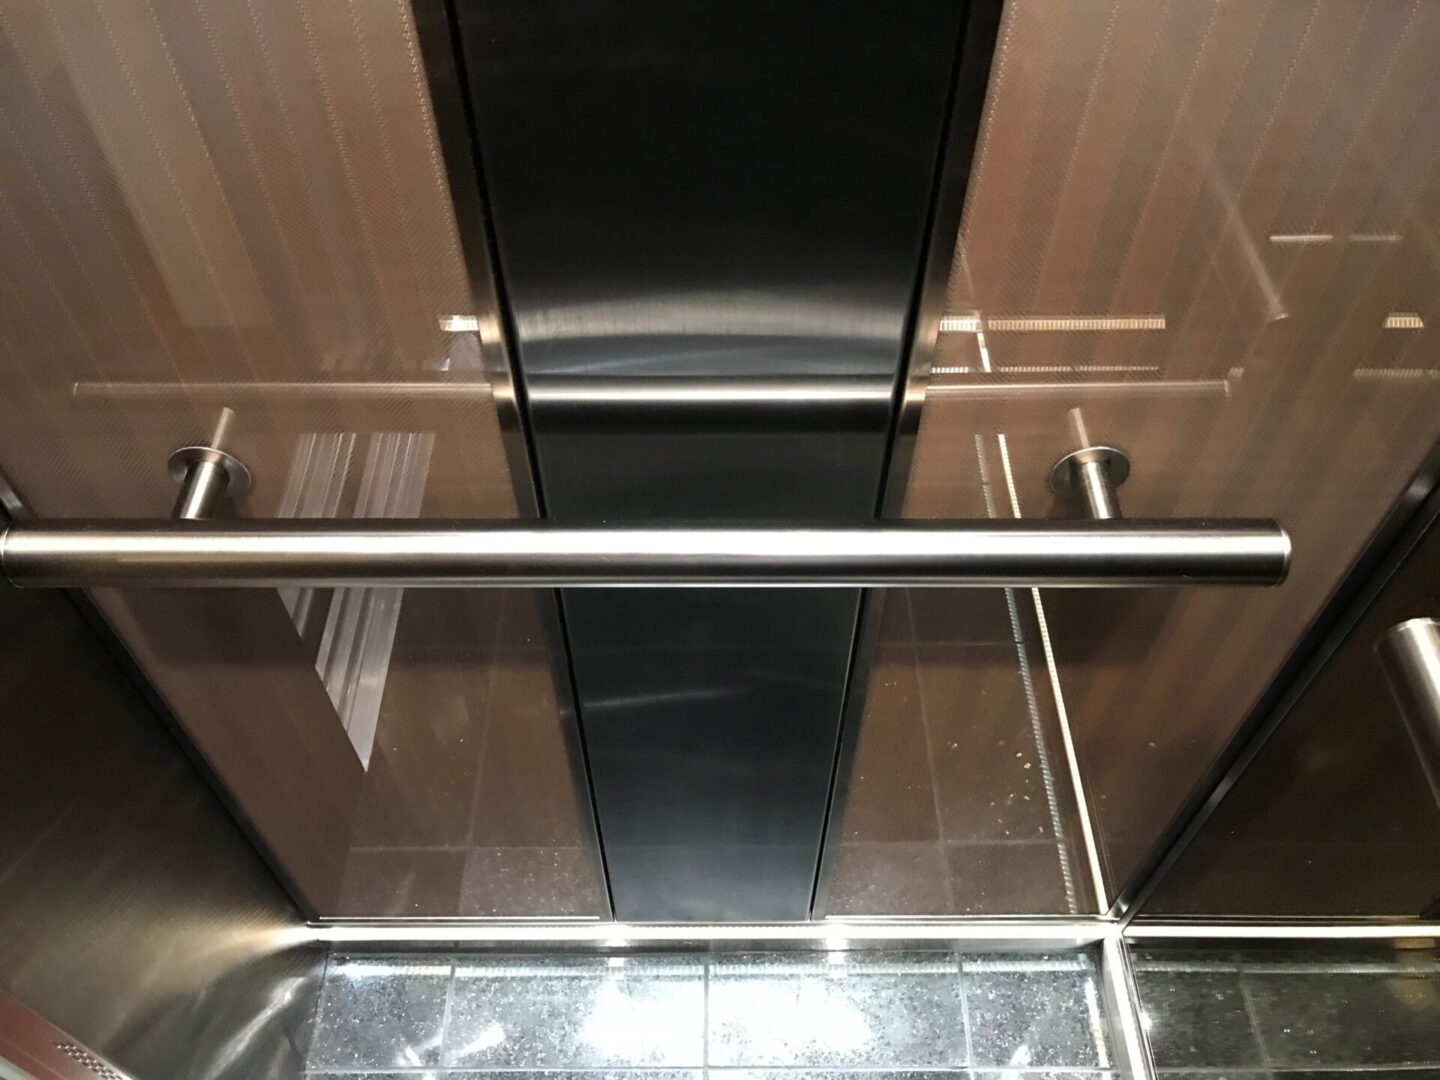 A view of the inside of an elevator.